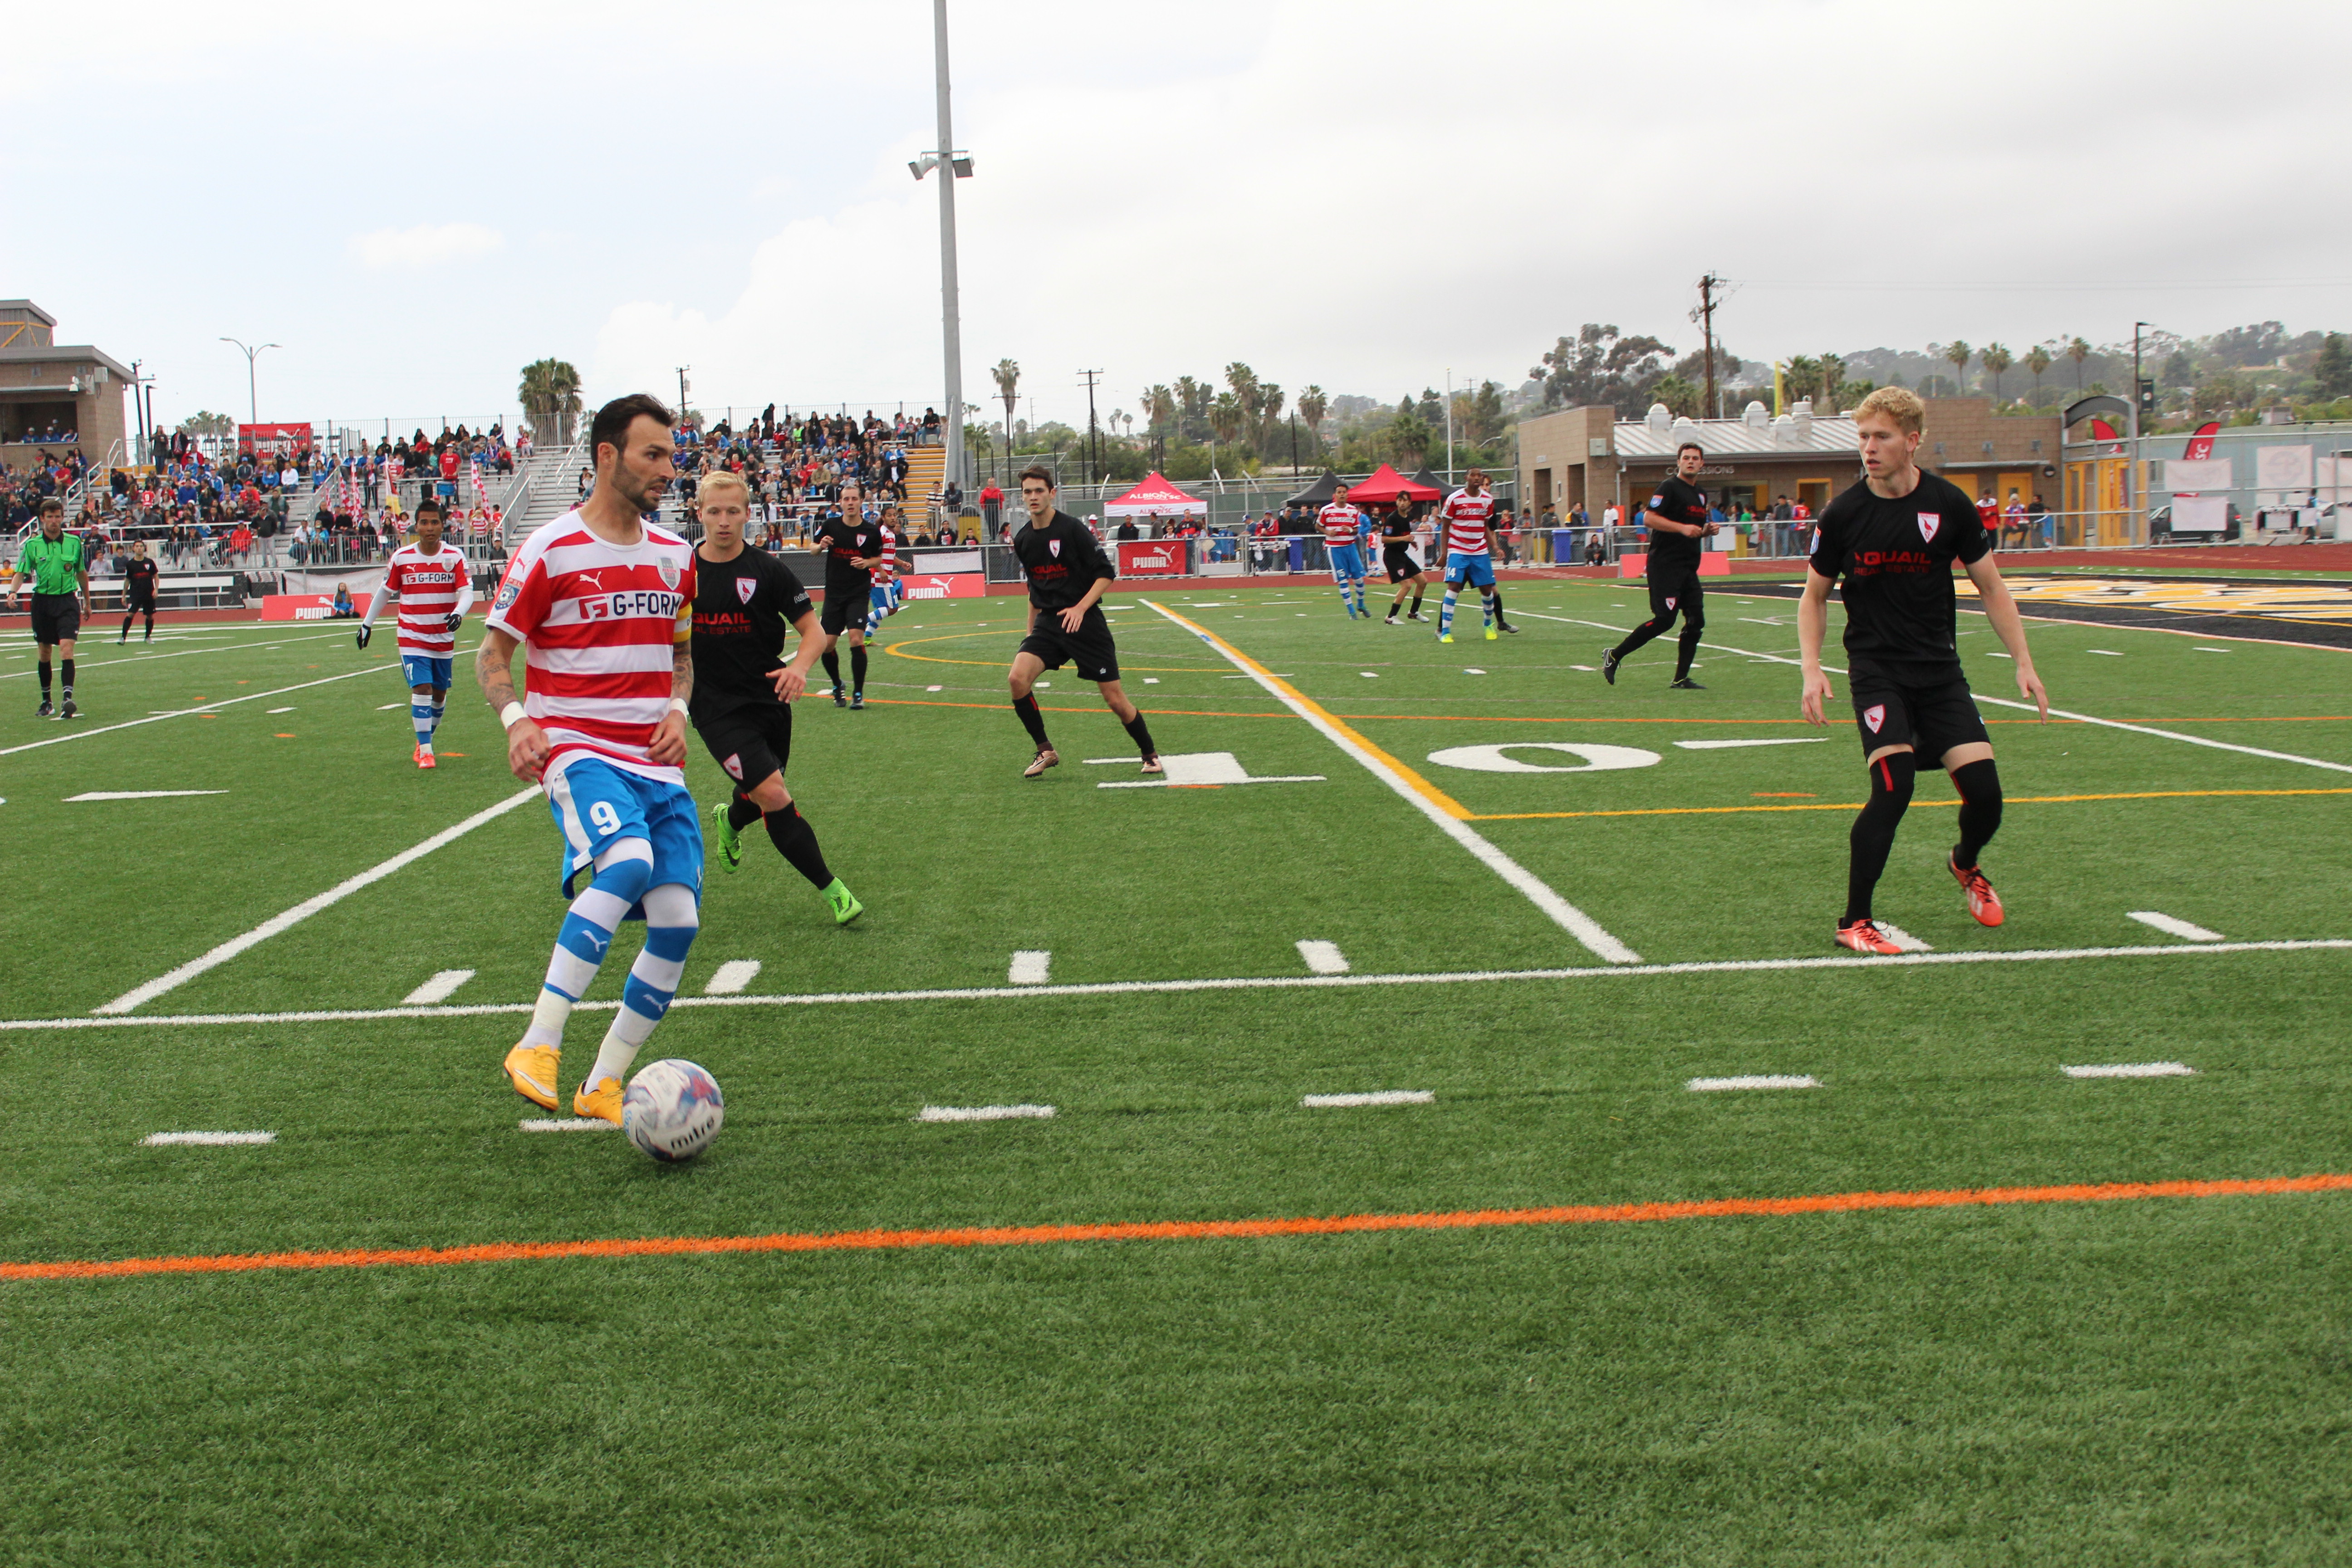 Soccer News: Albion Pros defeat Temecula FC in second week of NPSL